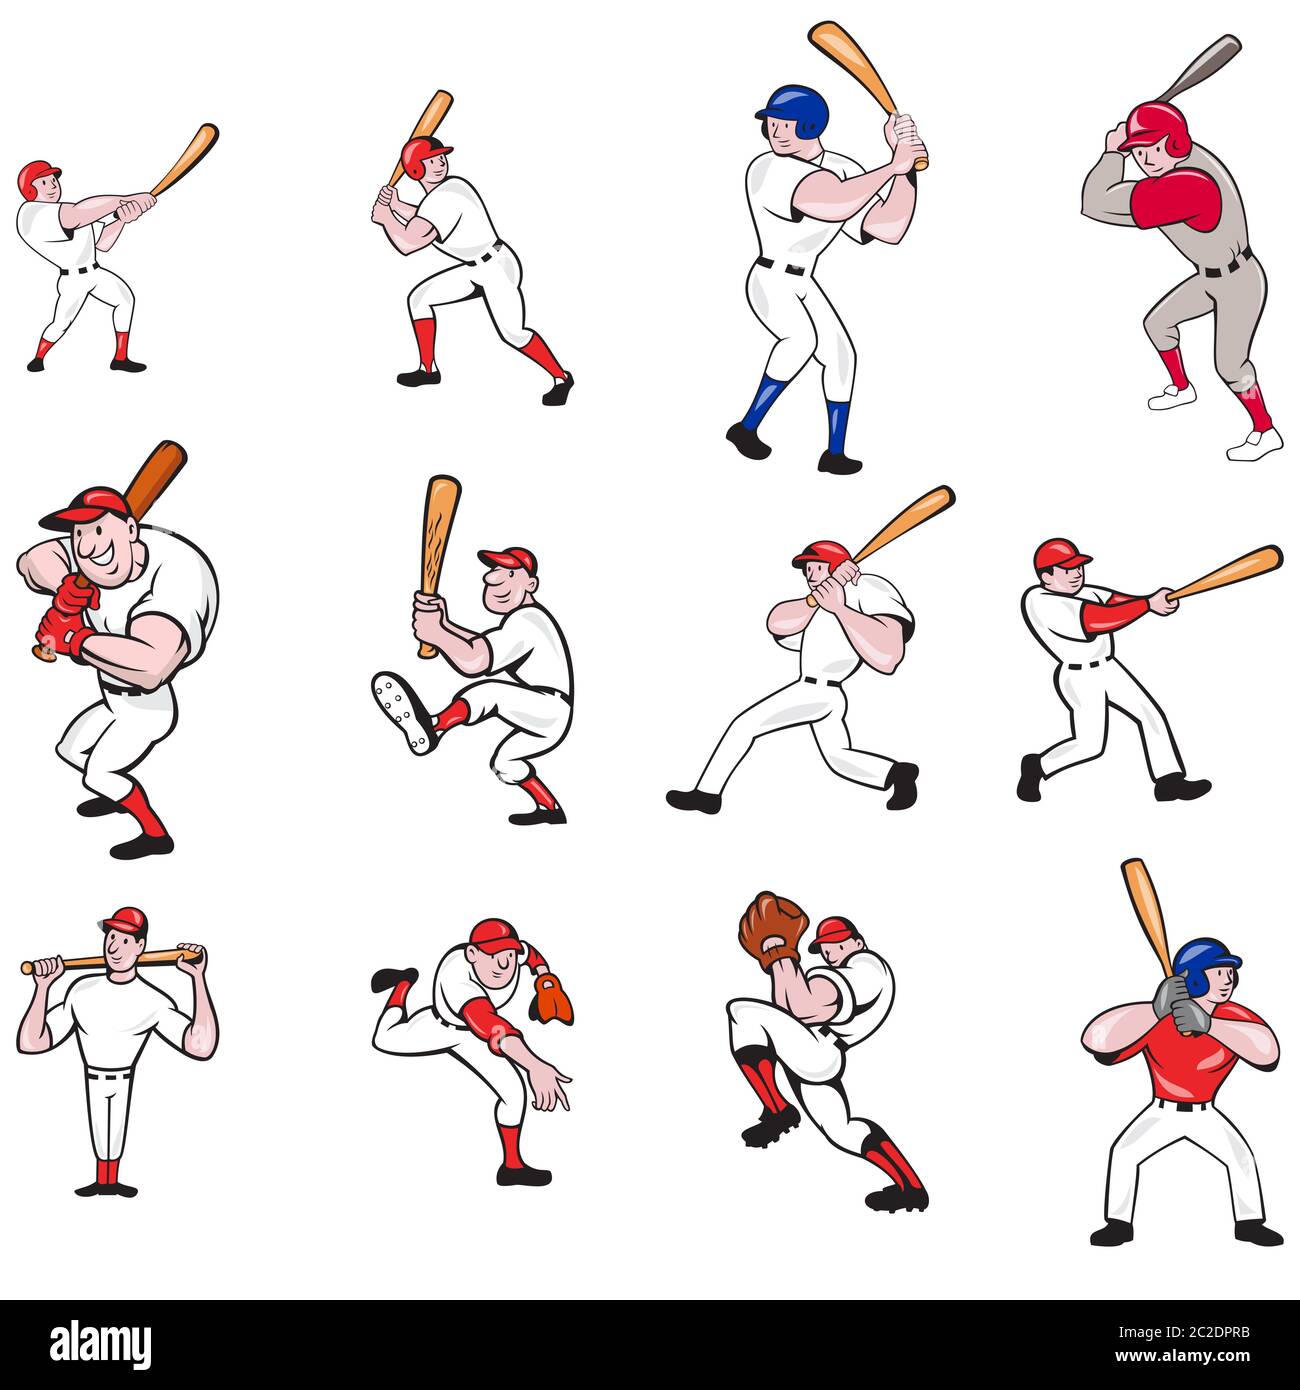 Set or collection illustration of American baseball player, pitcher or batter, batting, pitching or throwing ball cartoon style isolated on white back Stock Photo